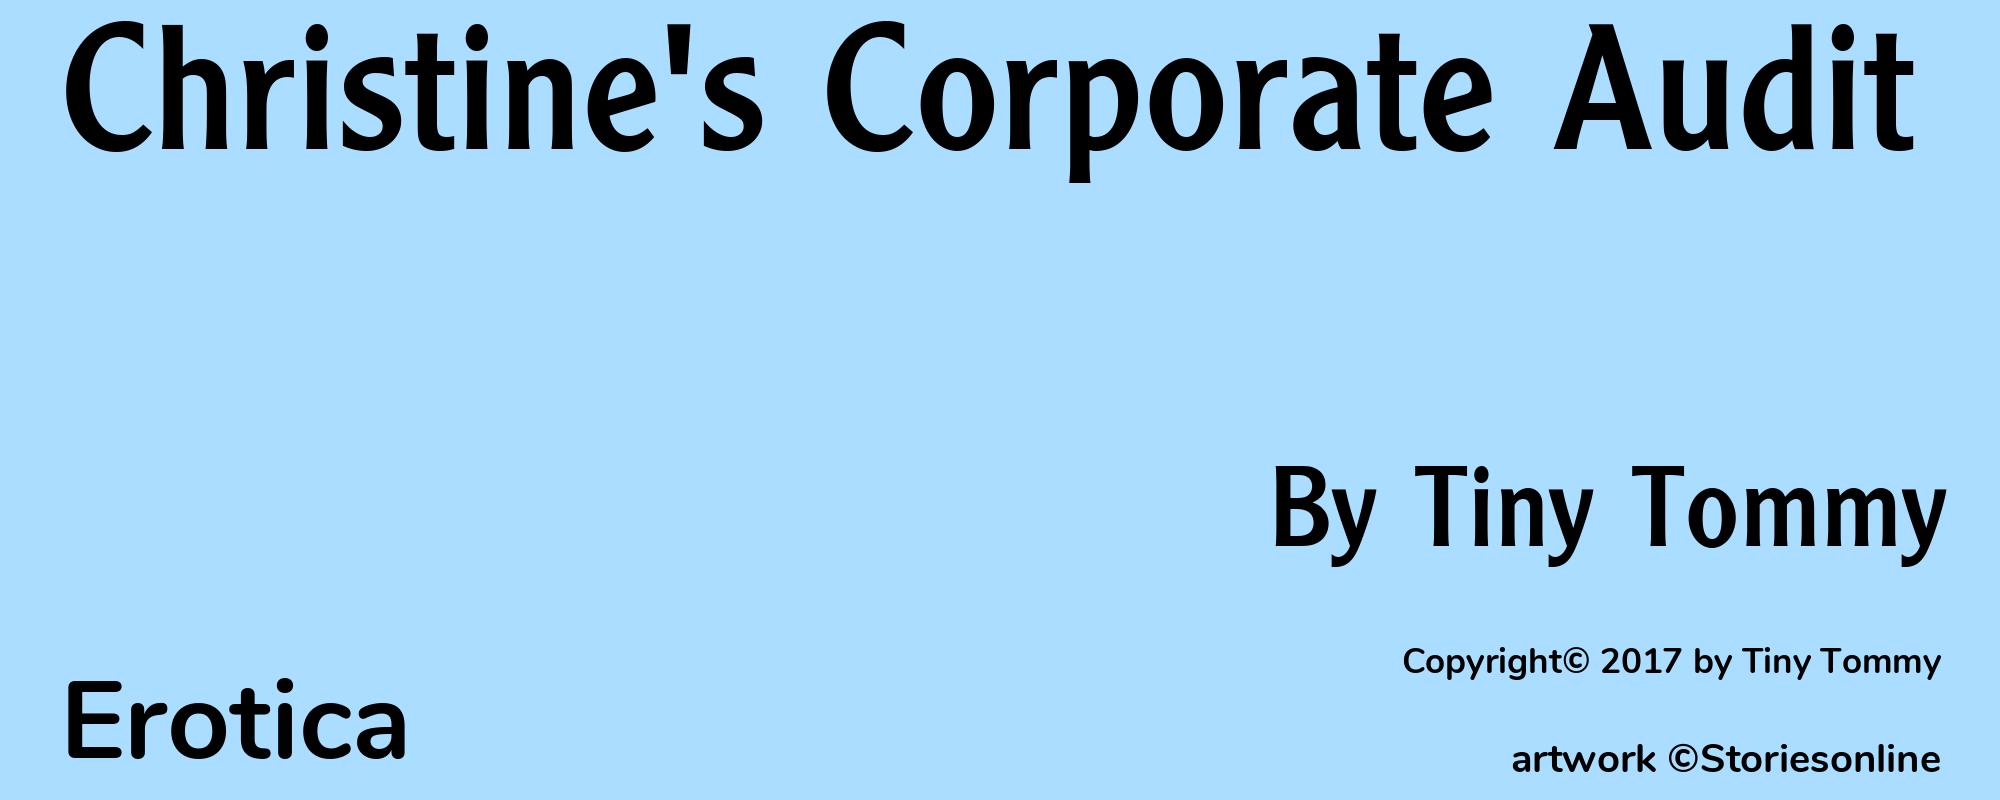 Christine's Corporate Audit - Cover